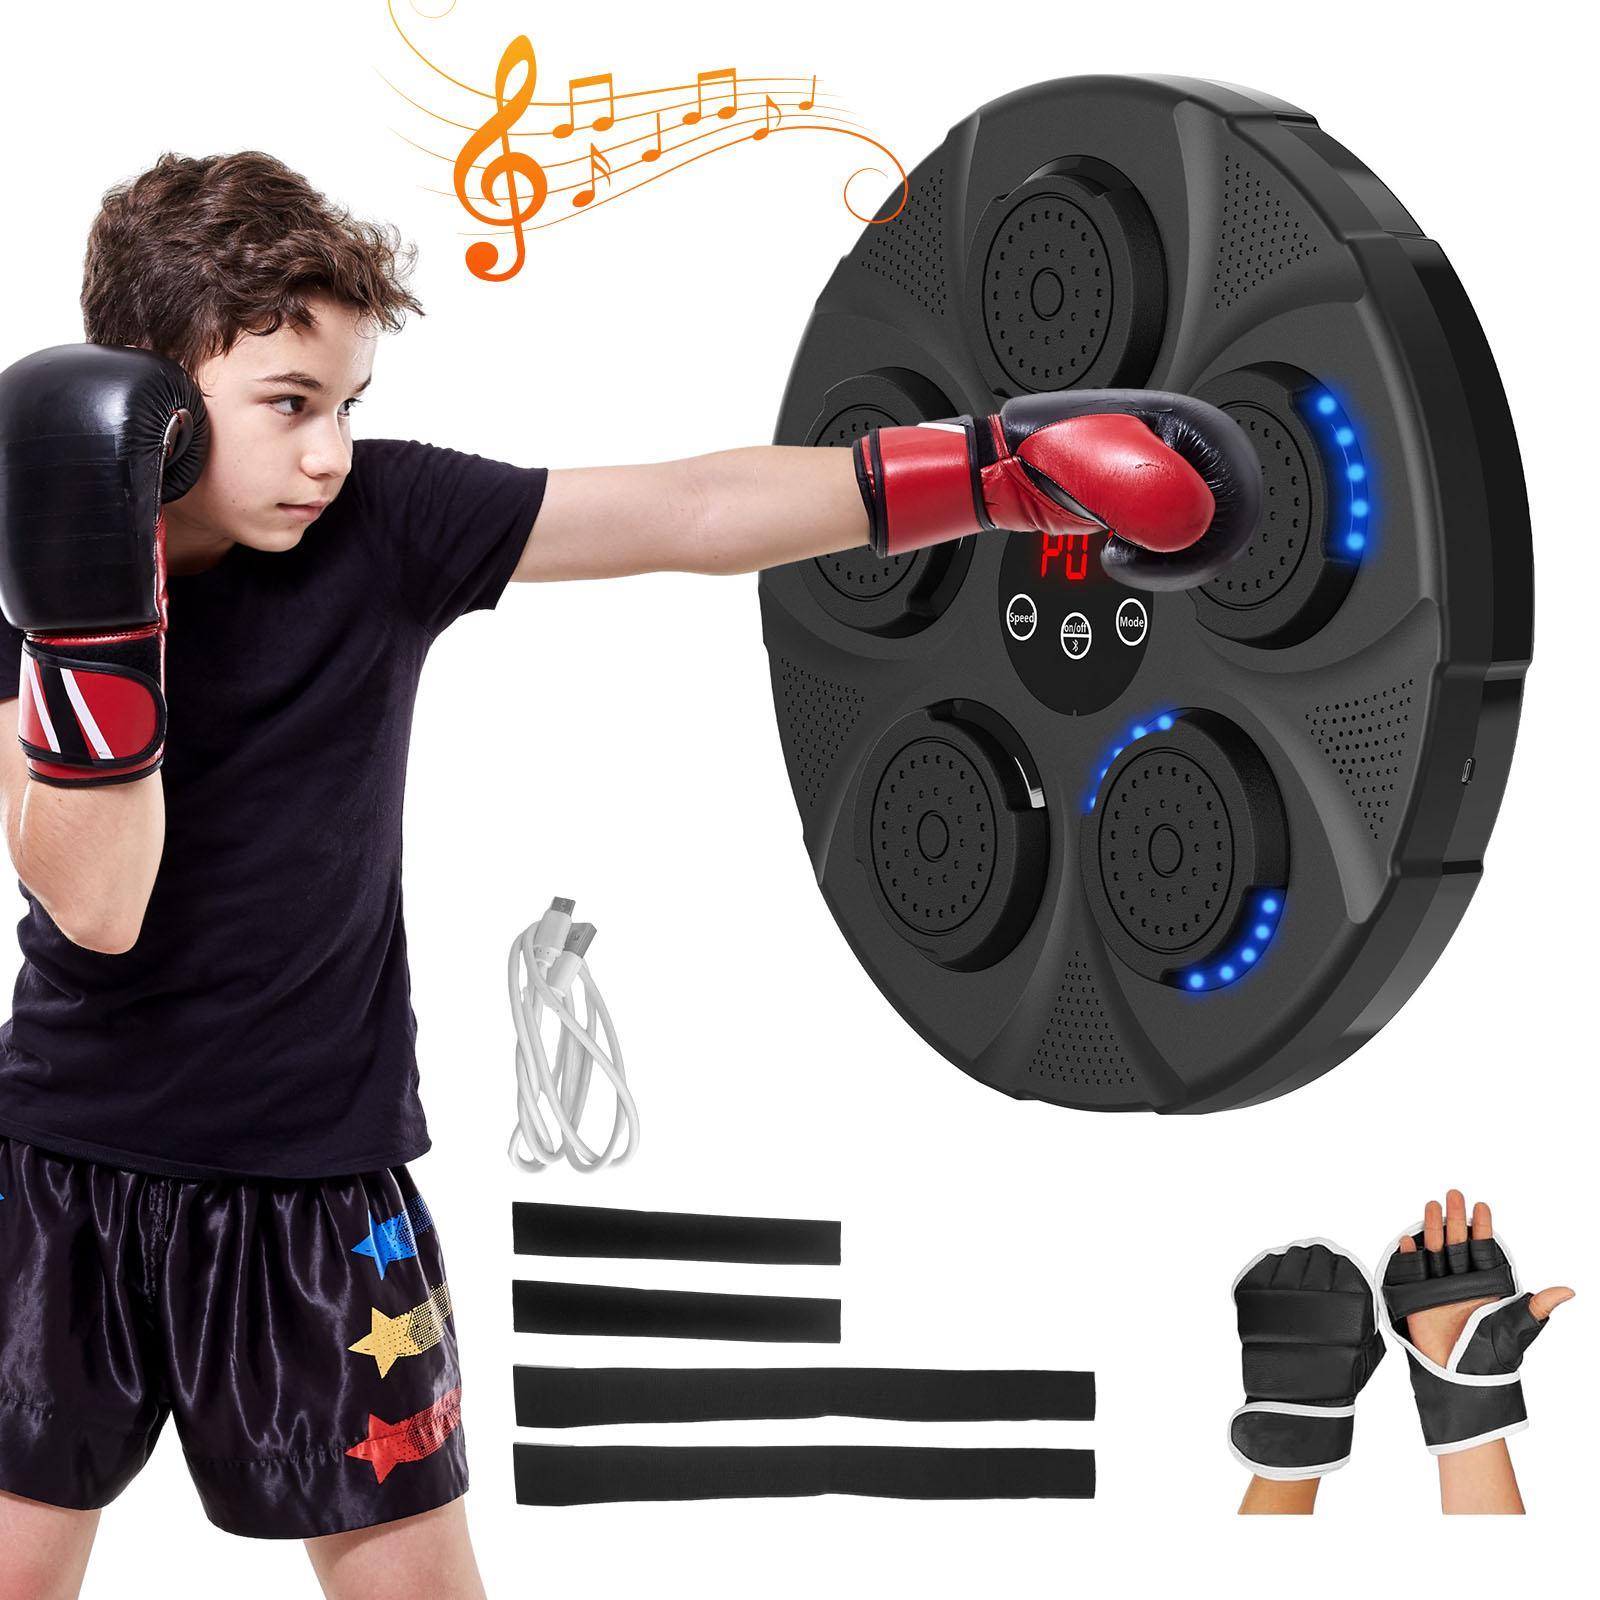 ADVWIN Boxing Training Machine, Wall Mounted Boxing Machine for Kids and Adults, Music Boxing Target w/Adjustable Light Speed for Reaction Strength Exercise